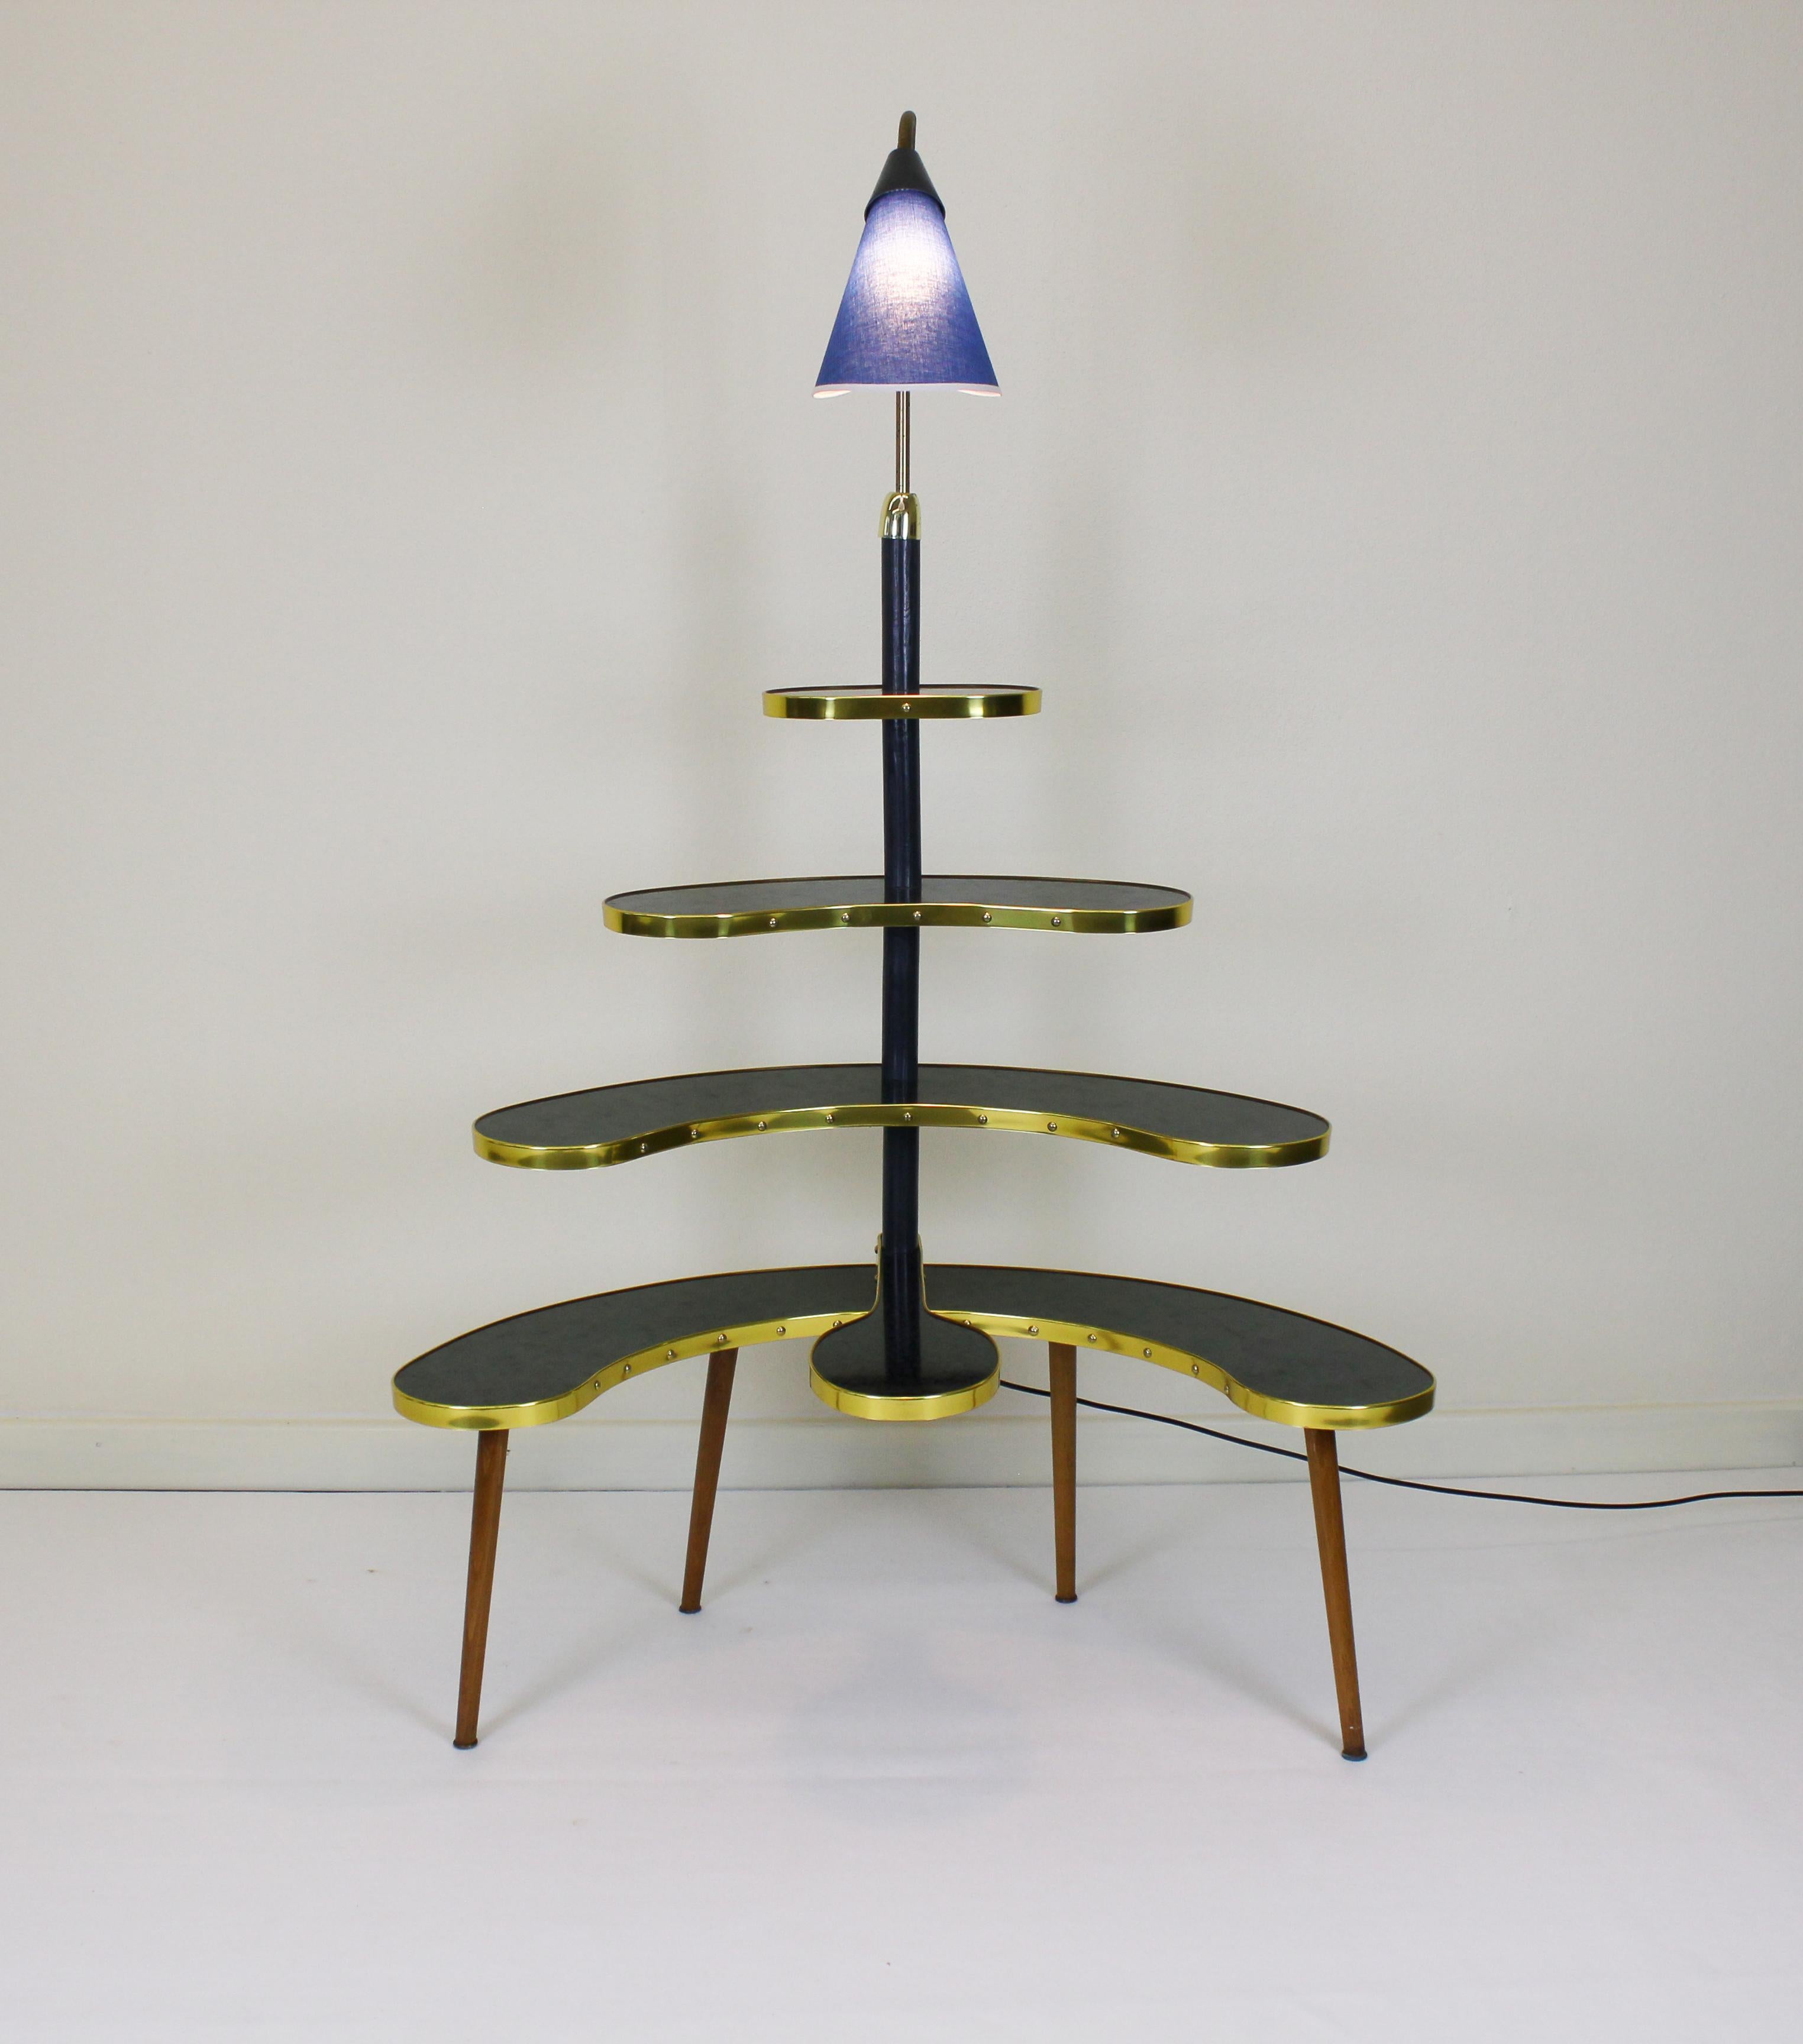 Nice floor lamp with some shelves 
Functional
